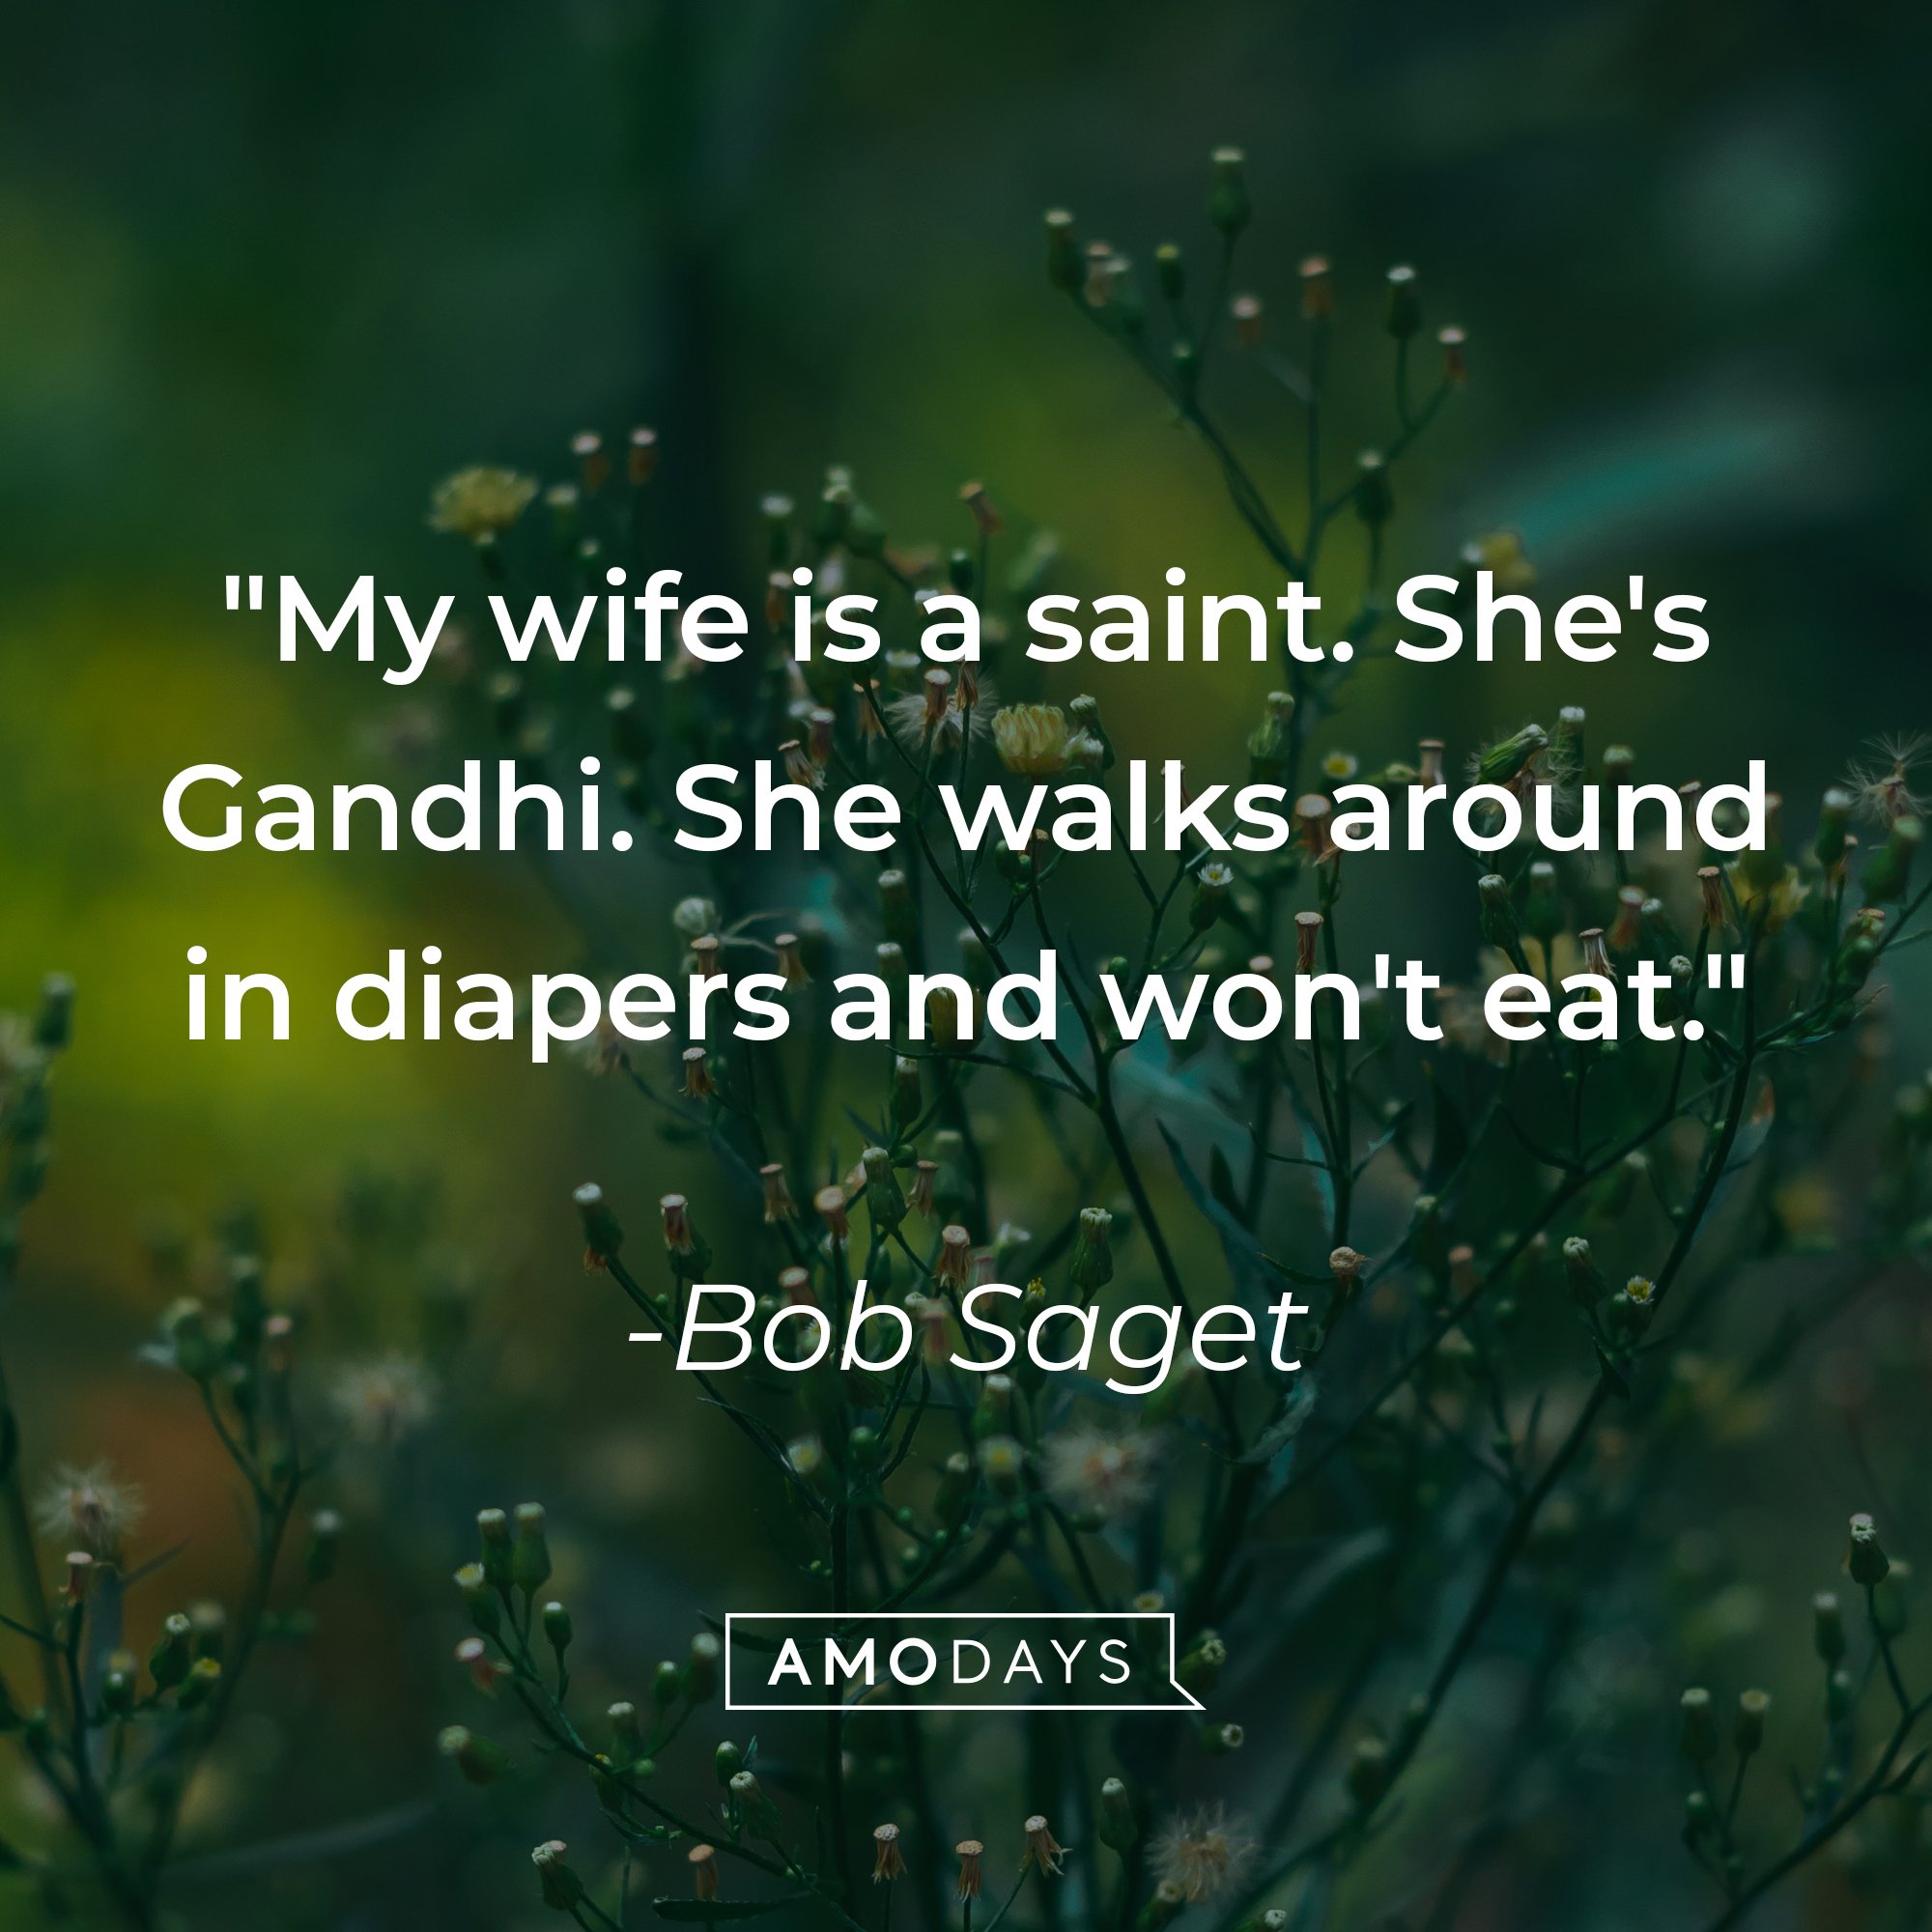  Bob Saget’s quote: "My wife is a saint. She's Gandhi. She walks around in diapers and won't eat." | Image: AmoDays